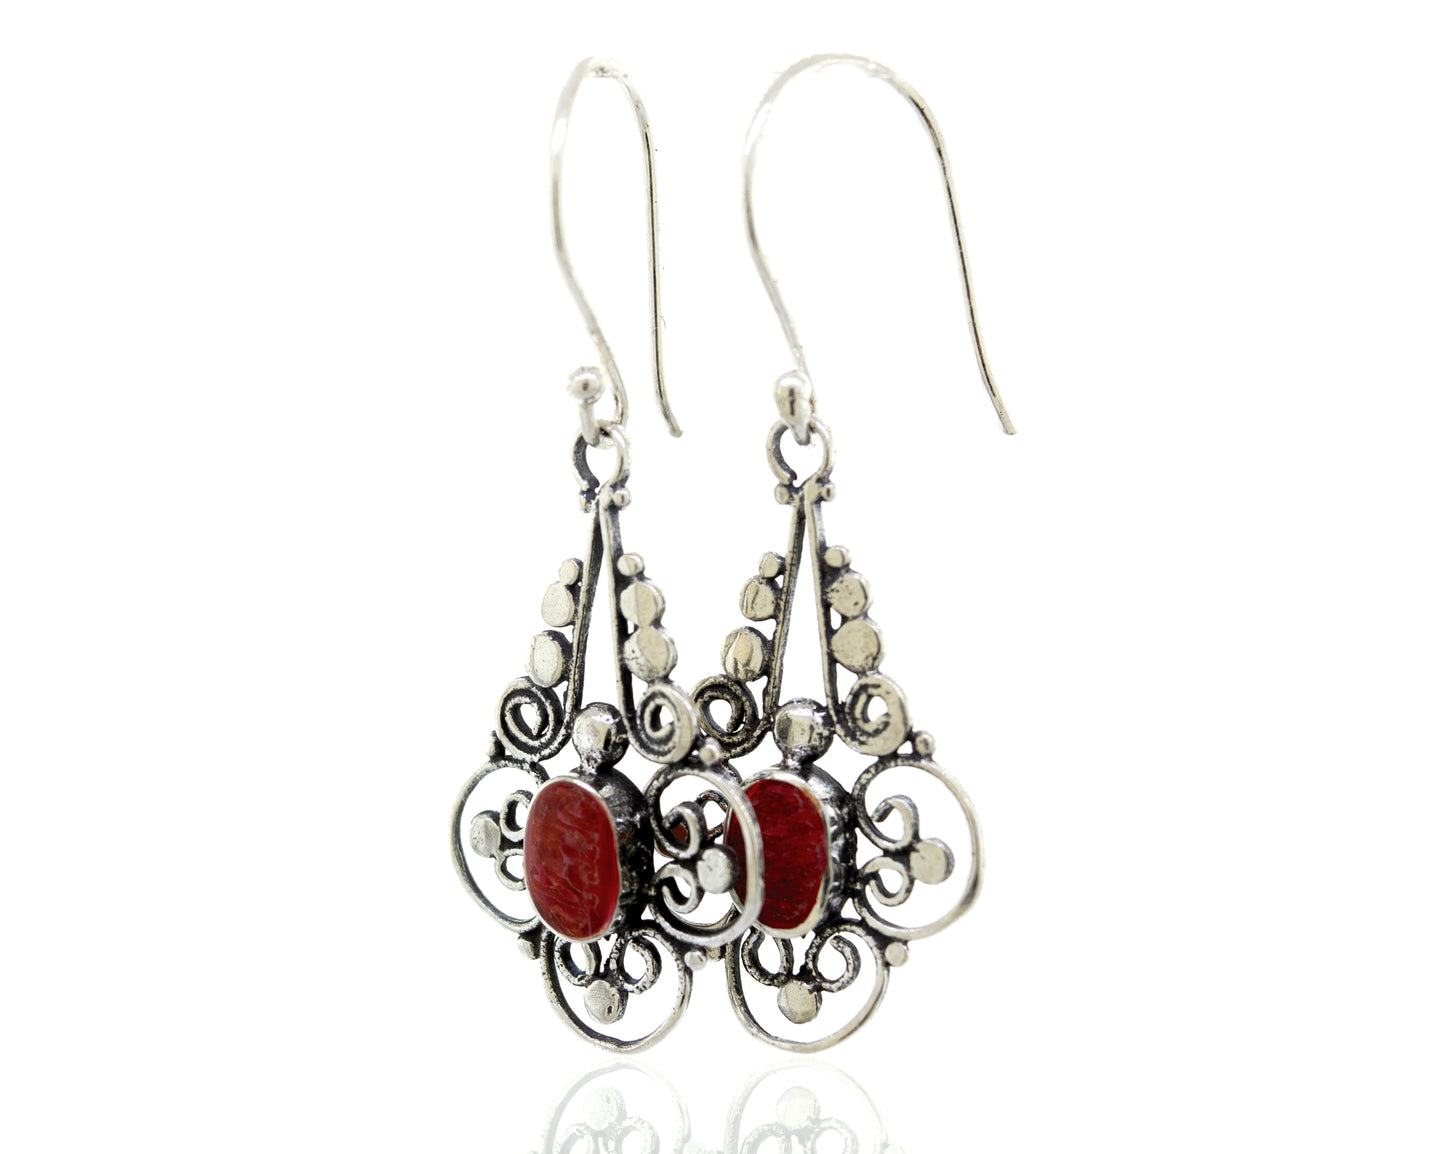 A pair of Oval Coral Dangle Earrings with a Flower design from the brand Super Silver.